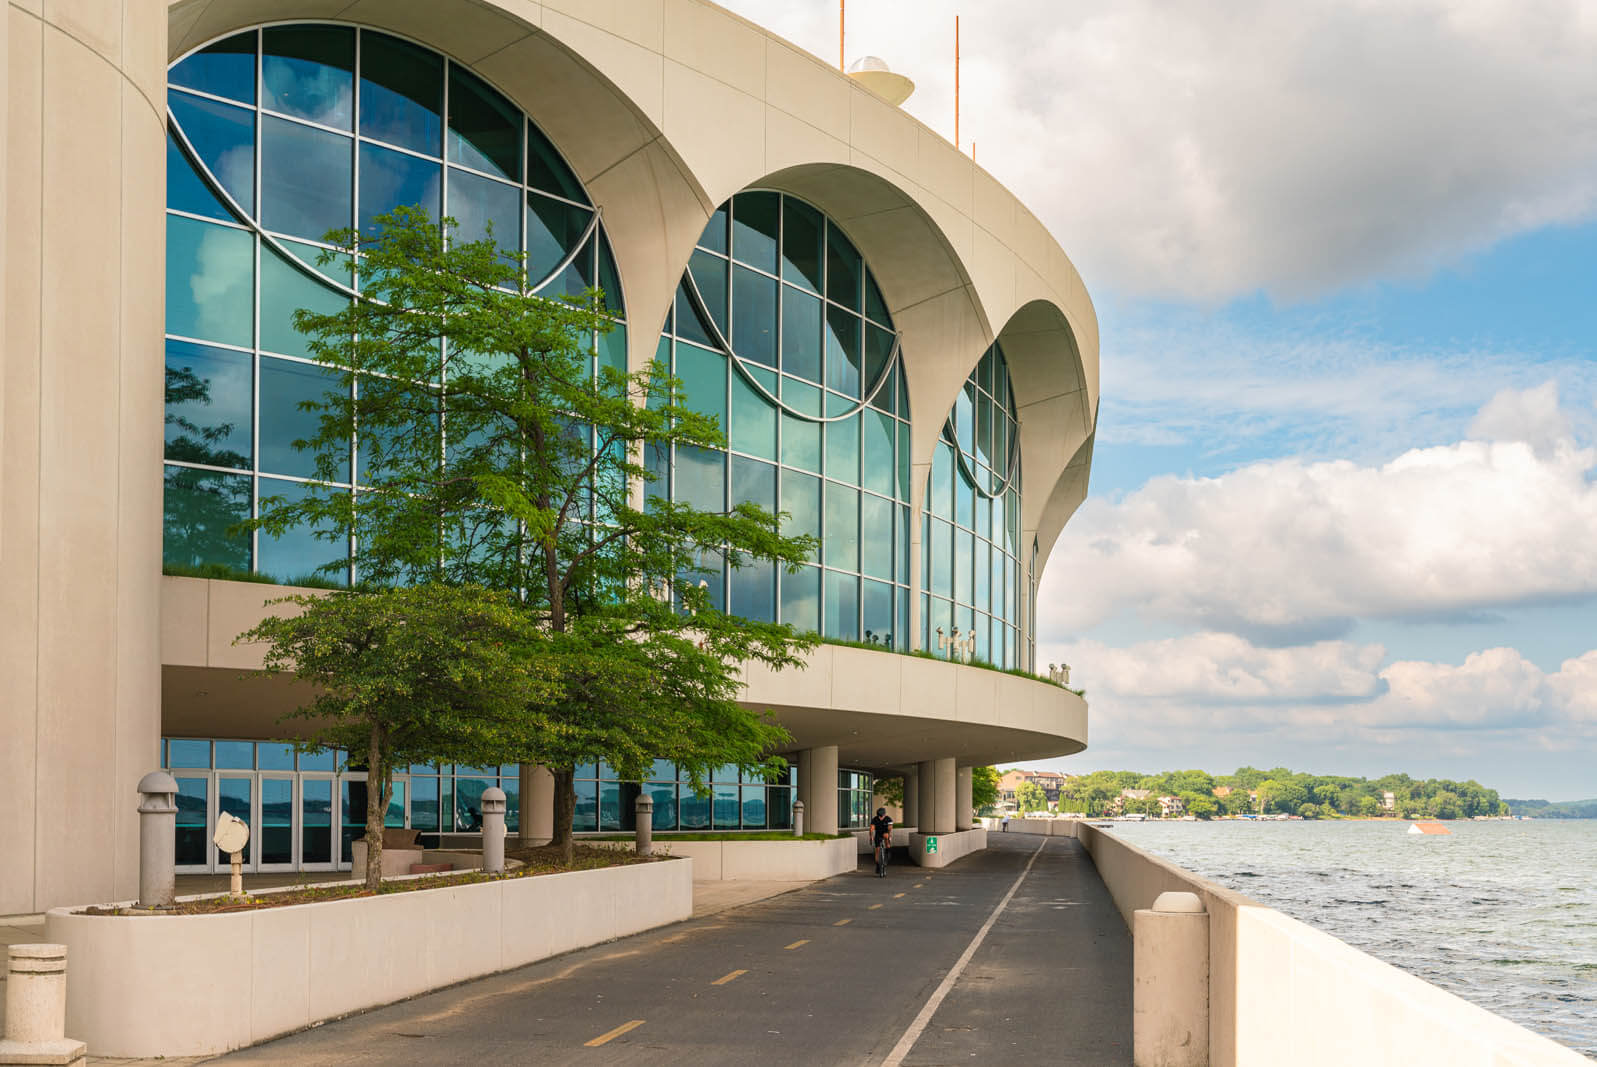 view of the Monona Terrace from the Lake Monona Bike Loop path in Madison Wisconsin